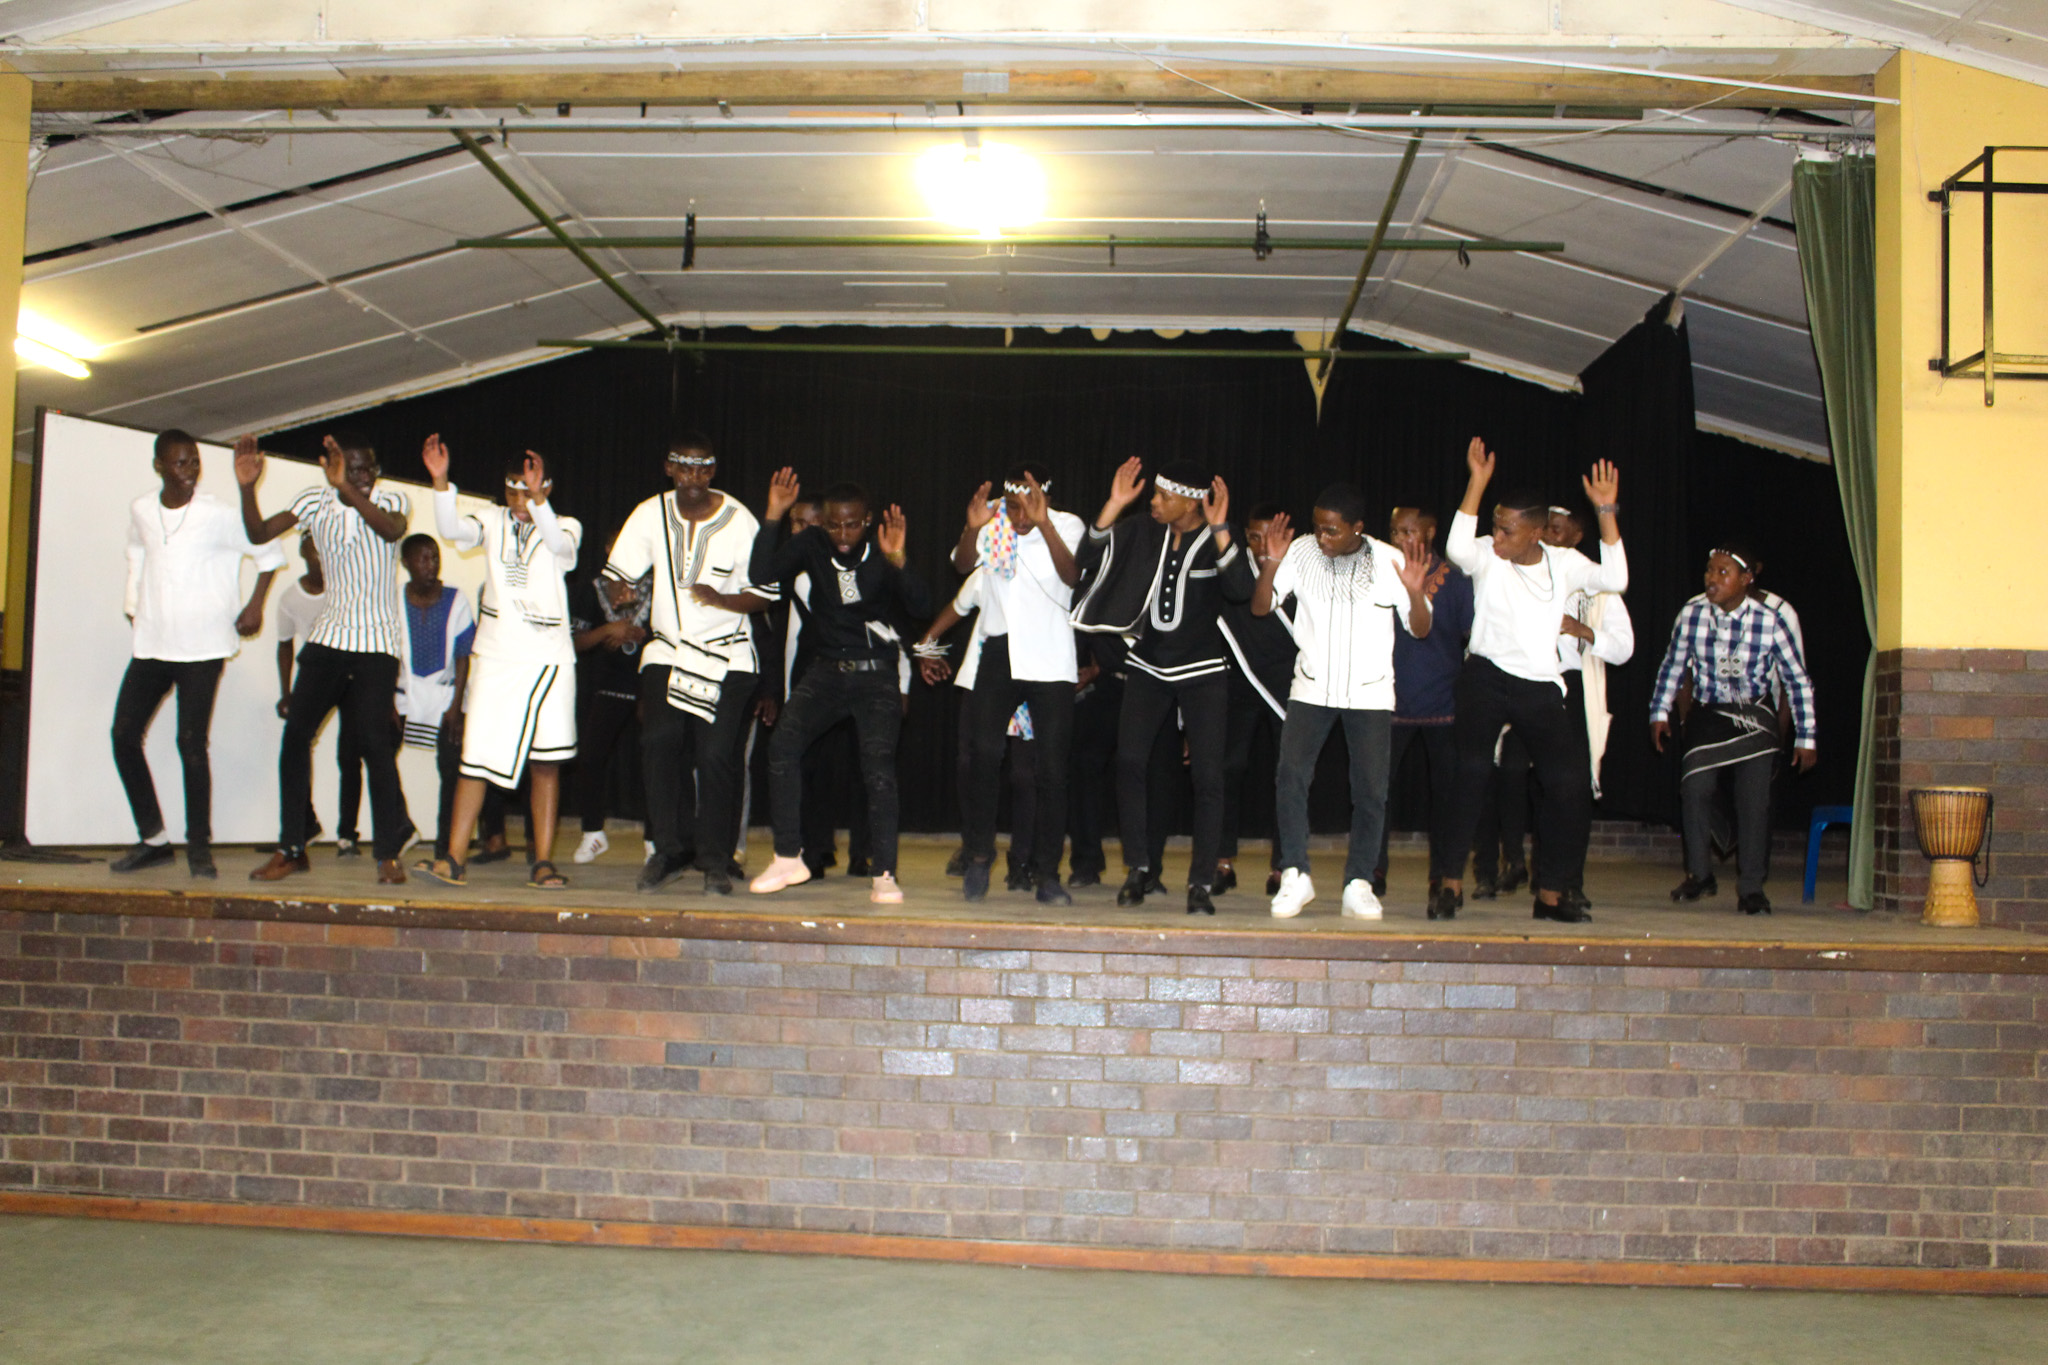 Makhanda Youth Choir male voices preforming on stage.